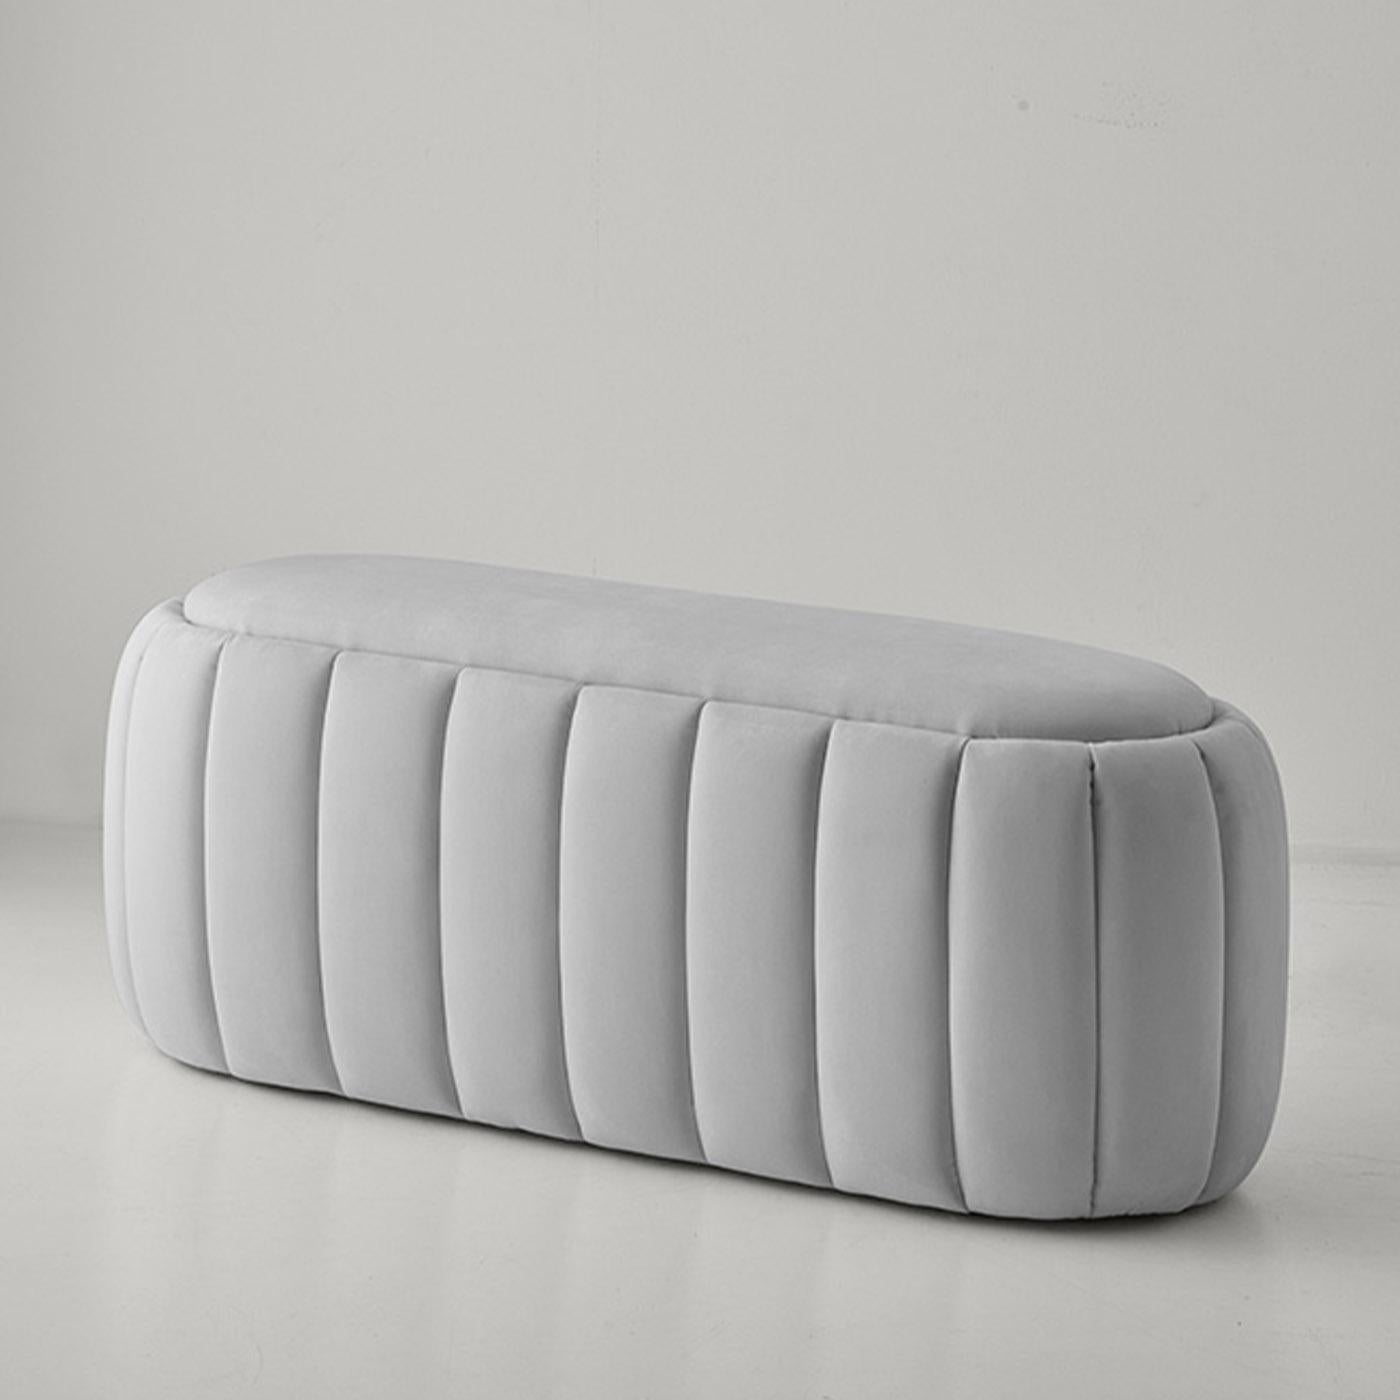 The bench is fully upholstered in water-repellent and washable 'Econabuk Bretone' microfibre fabric. The elegant bench has a particular rounded shape that is suitable for any type of room in the house. It is very robust and it can support heavy